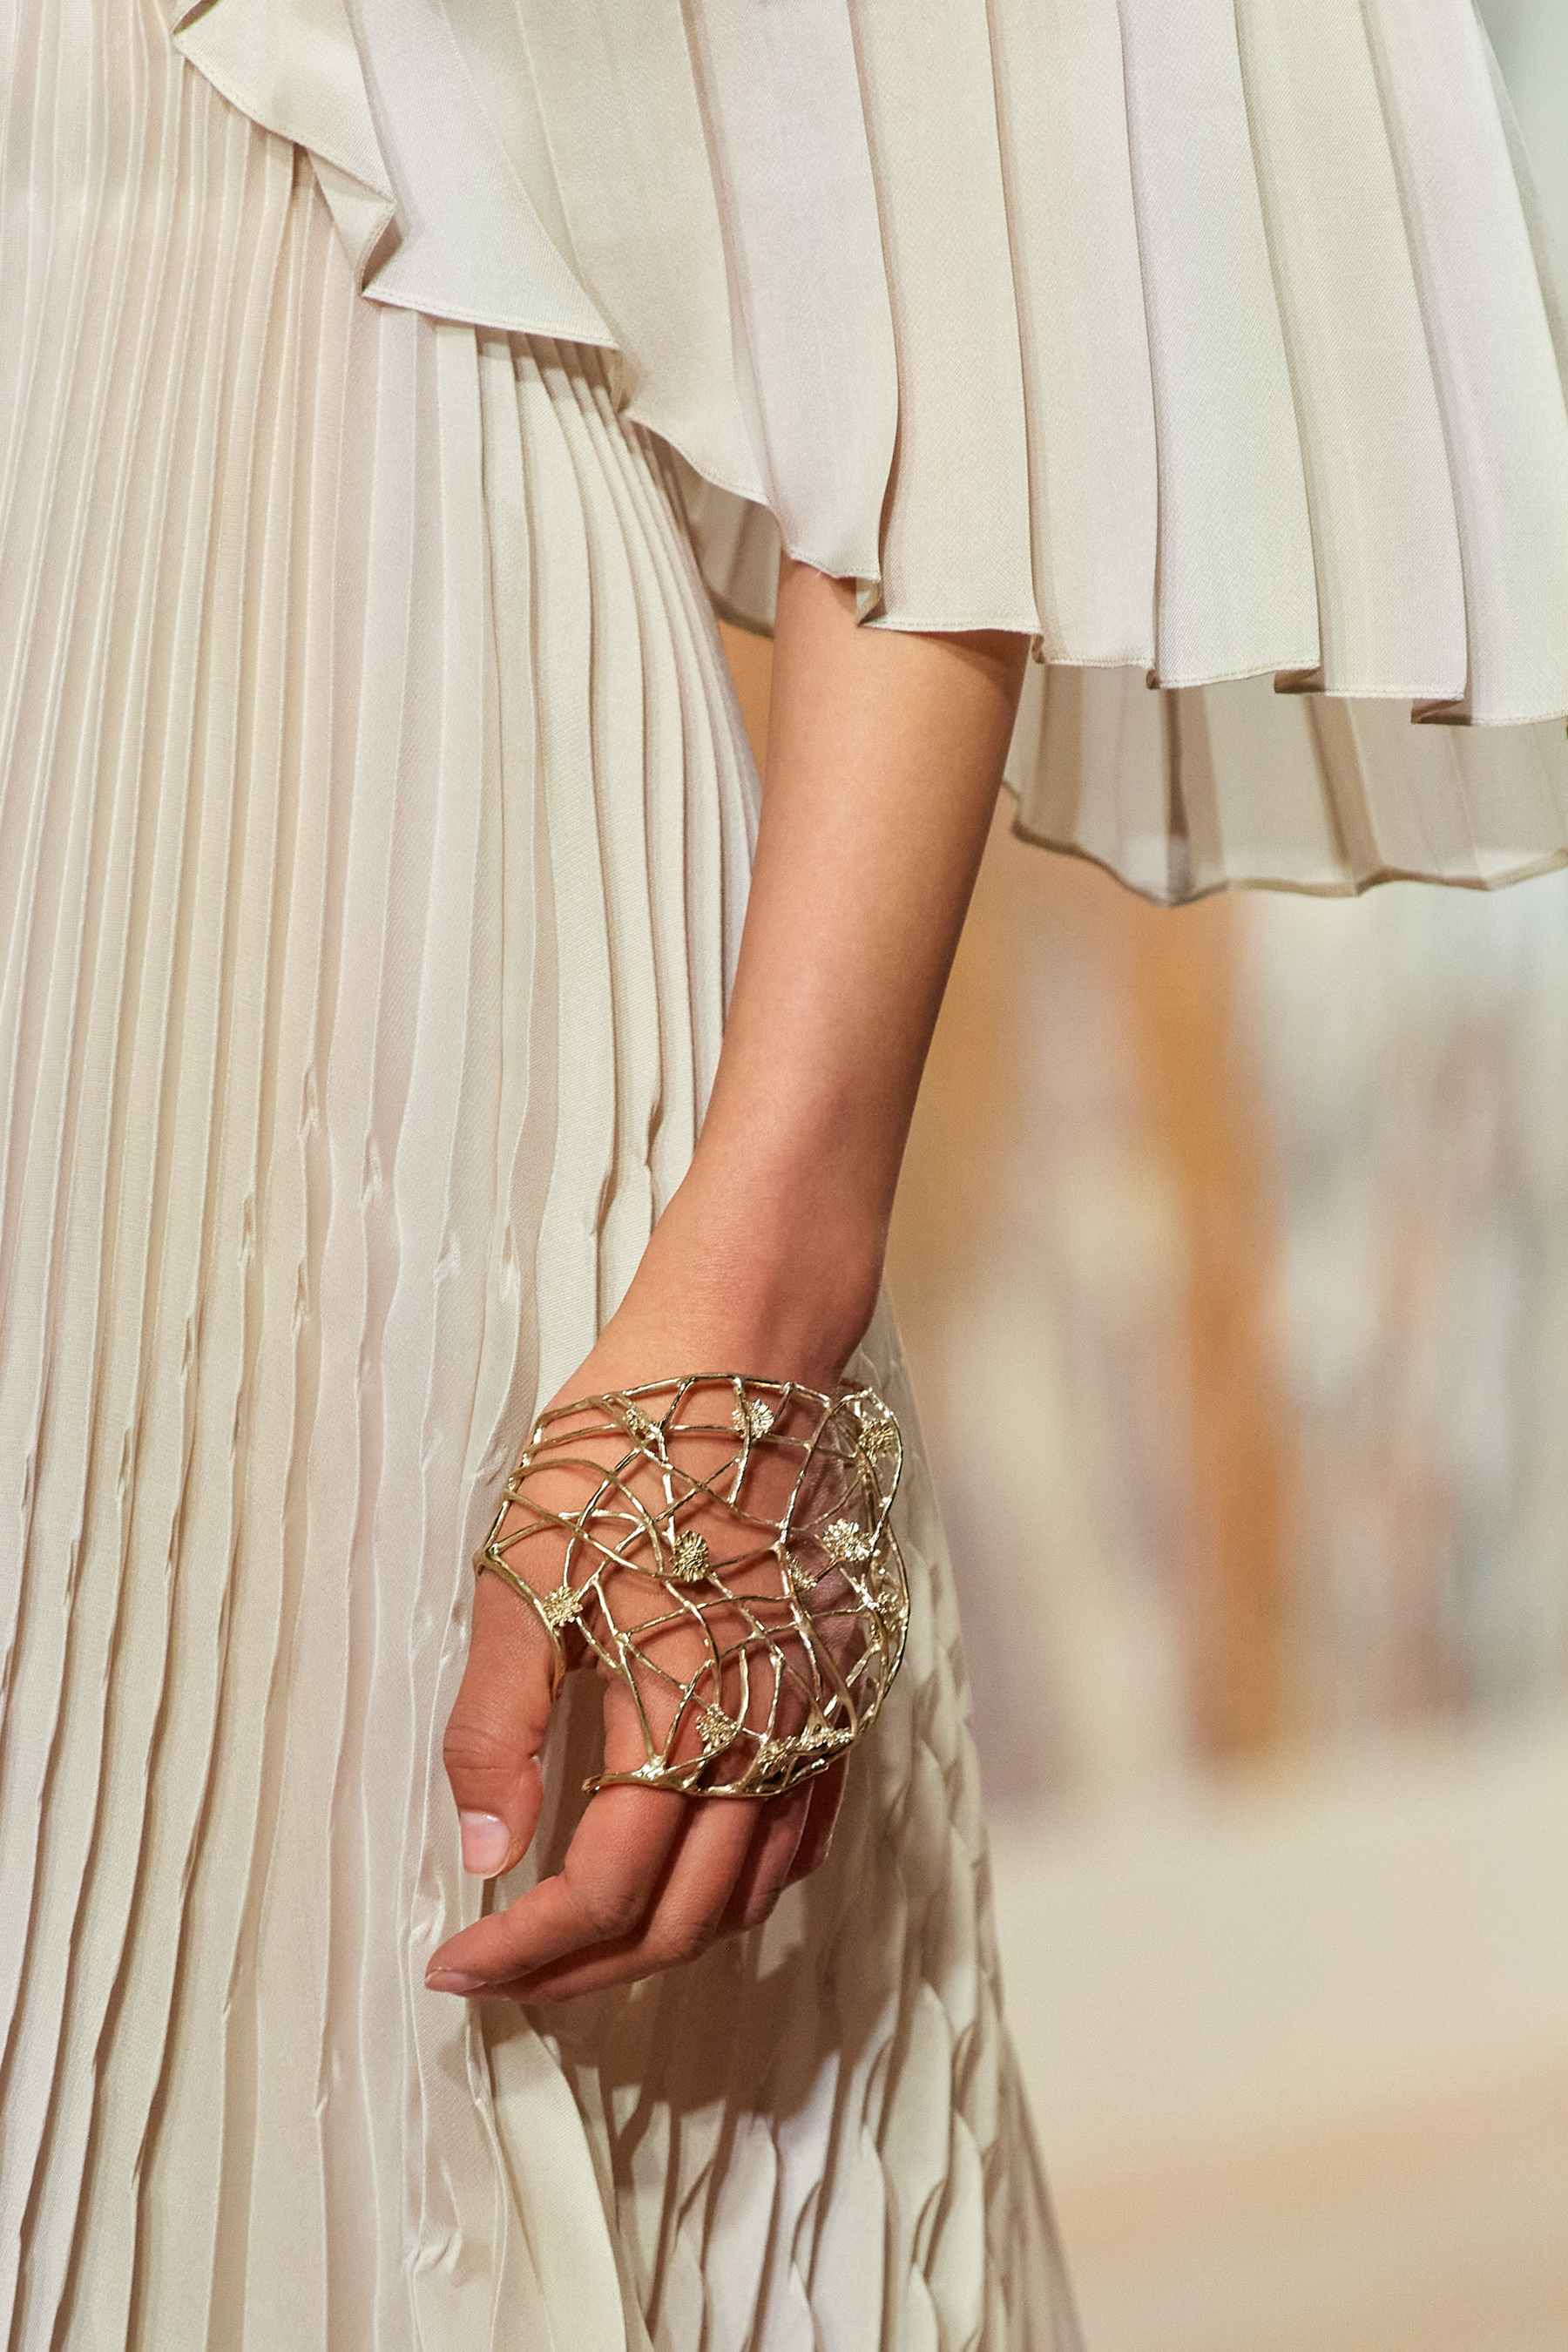 Christian Dior Fall 2021 Couture Details Fashion Show | The Impression